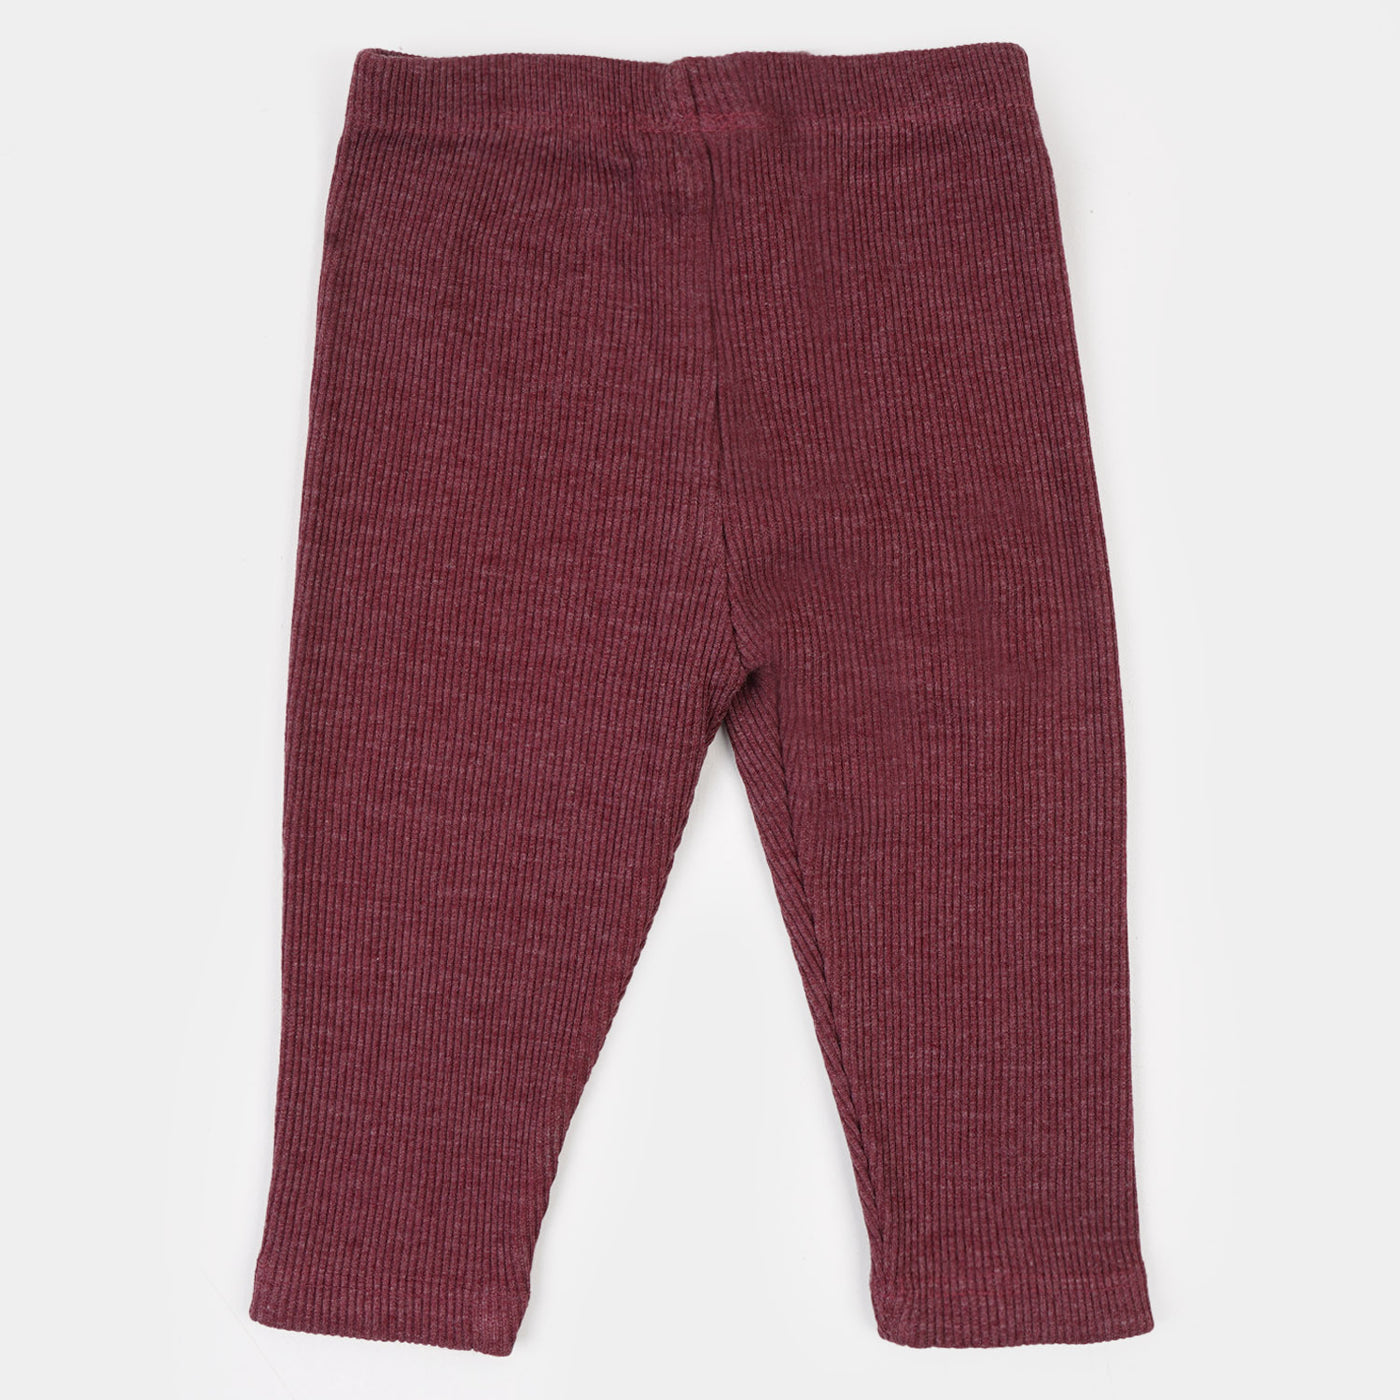 Infant Girls Tights - MAROON